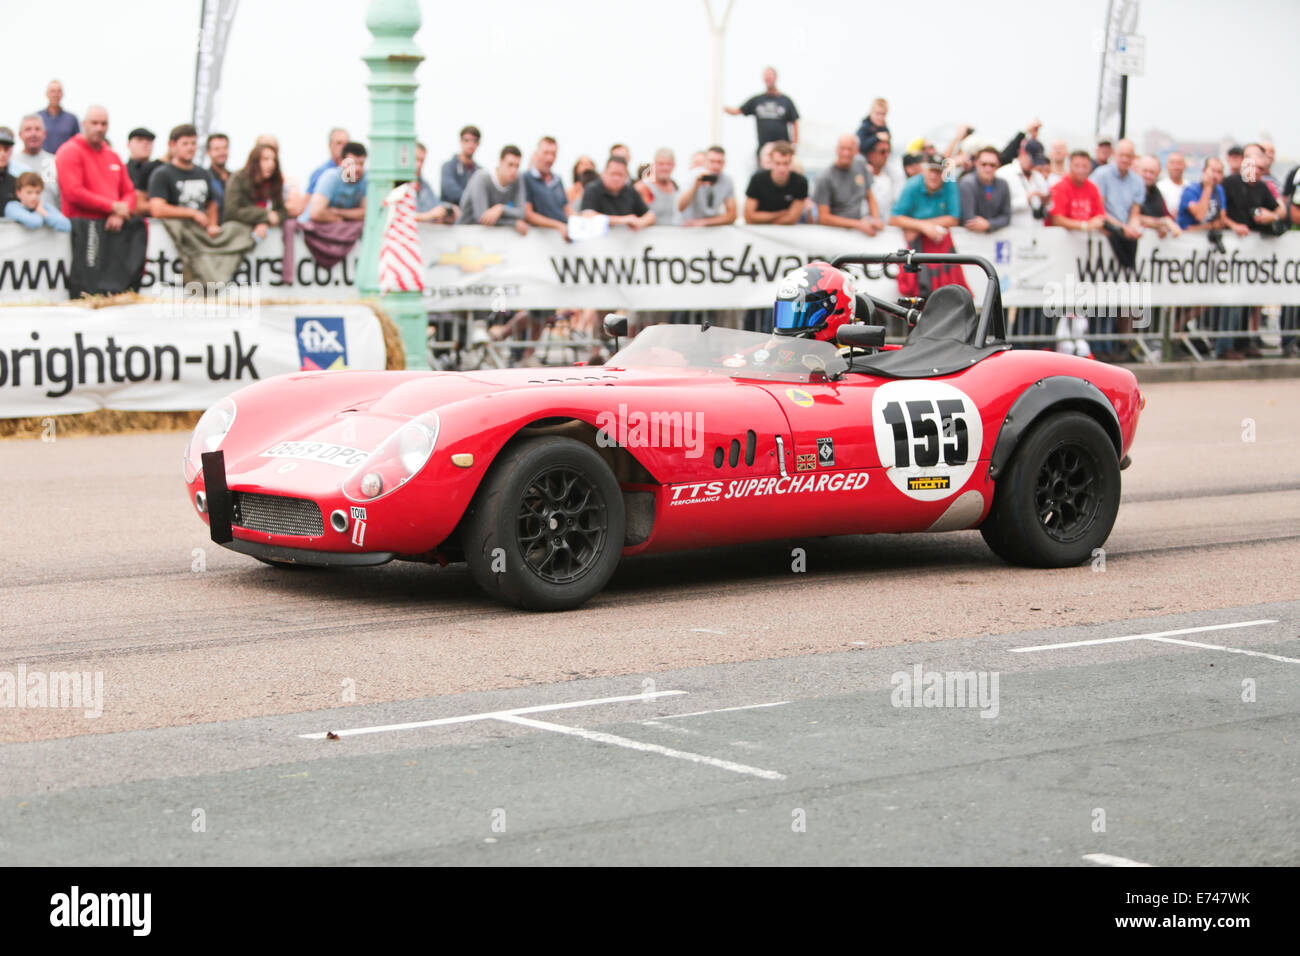 This Jeff Wiltshire driving a Sylva Phoenix at the Brighton National Speed Trials organised by the Brighton & Hove Motor Club held annually at Madeira Drive, Brighton Seafront, Brighton, East Sussex, UK Stock Photo